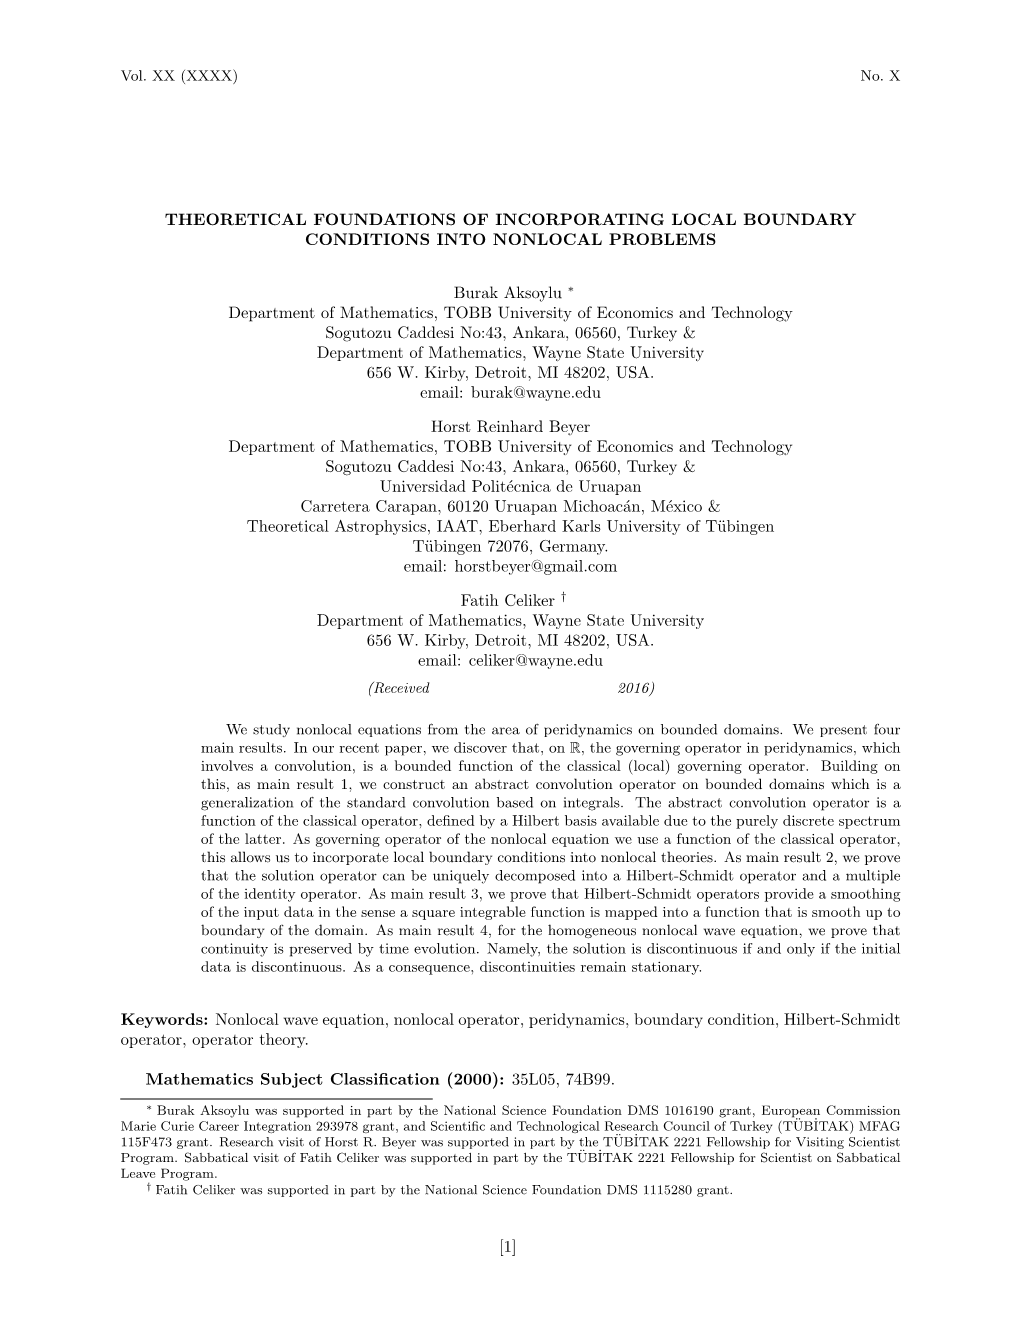 Theoretical Foundations of Incorporating Local Boundary Conditions Into Nonlocal Problems